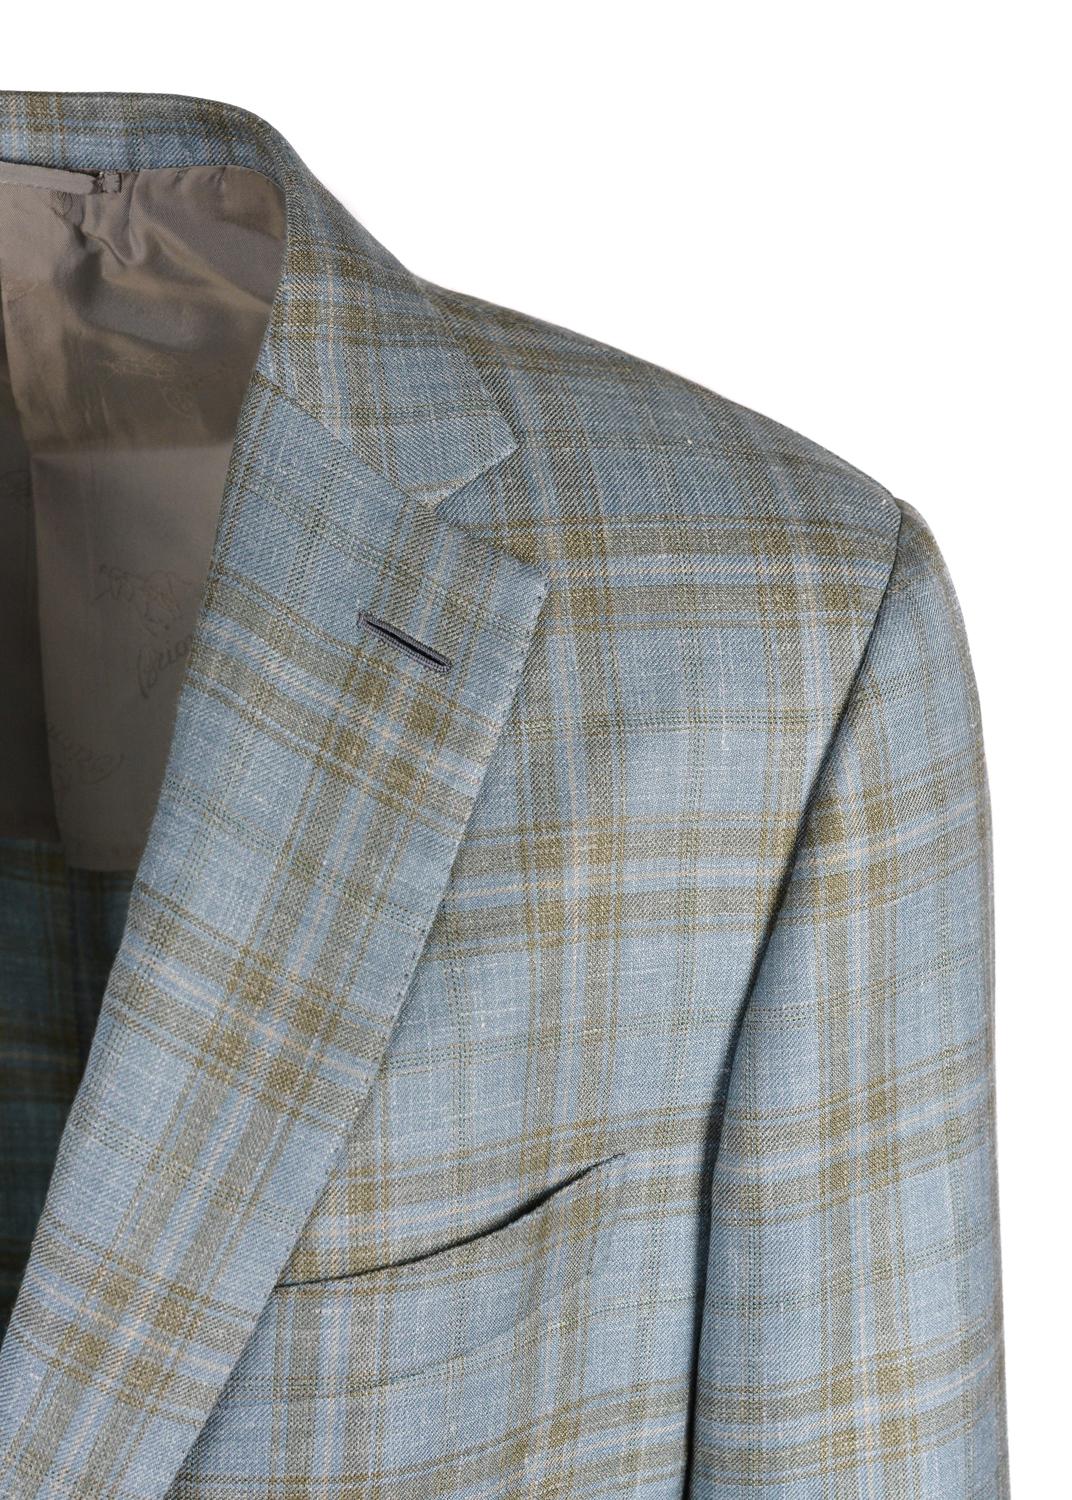 Display your artistic air in your Brioni Brunico Sportscoat. Walk into the season with cool confidence in your light blue based, wool, silk and linen blended, grey infused checkered sportscoat. This unit can be paired with slim trousers to assist in